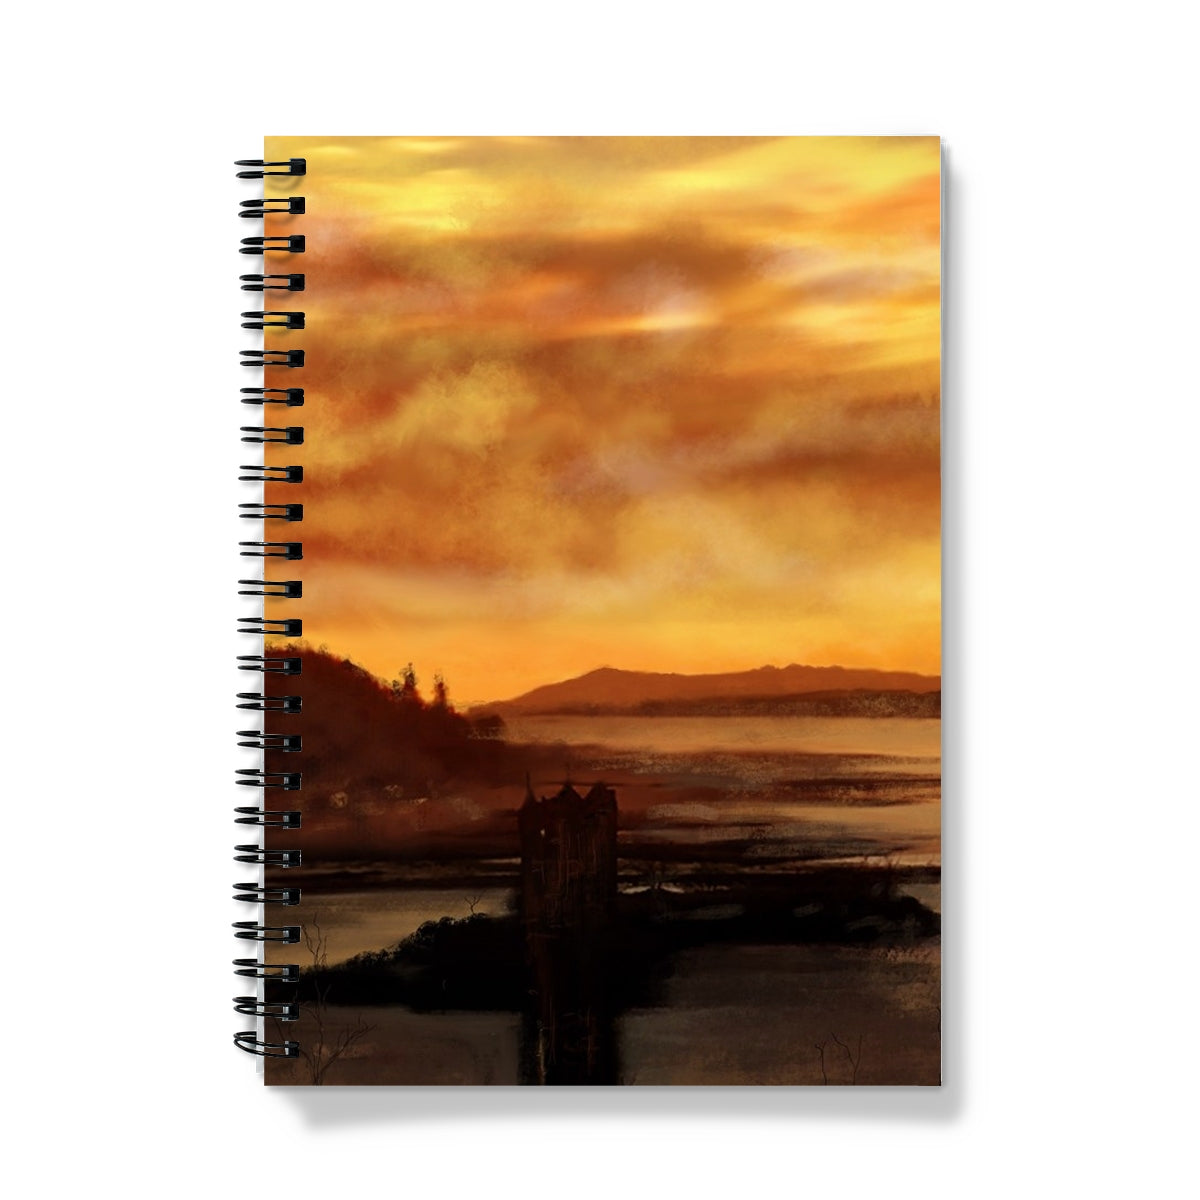 Castle Stalker Dusk Art Gifts Notebook-Journals & Notebooks-Historic & Iconic Scotland Art Gallery-A5-Lined-Paintings, Prints, Homeware, Art Gifts From Scotland By Scottish Artist Kevin Hunter